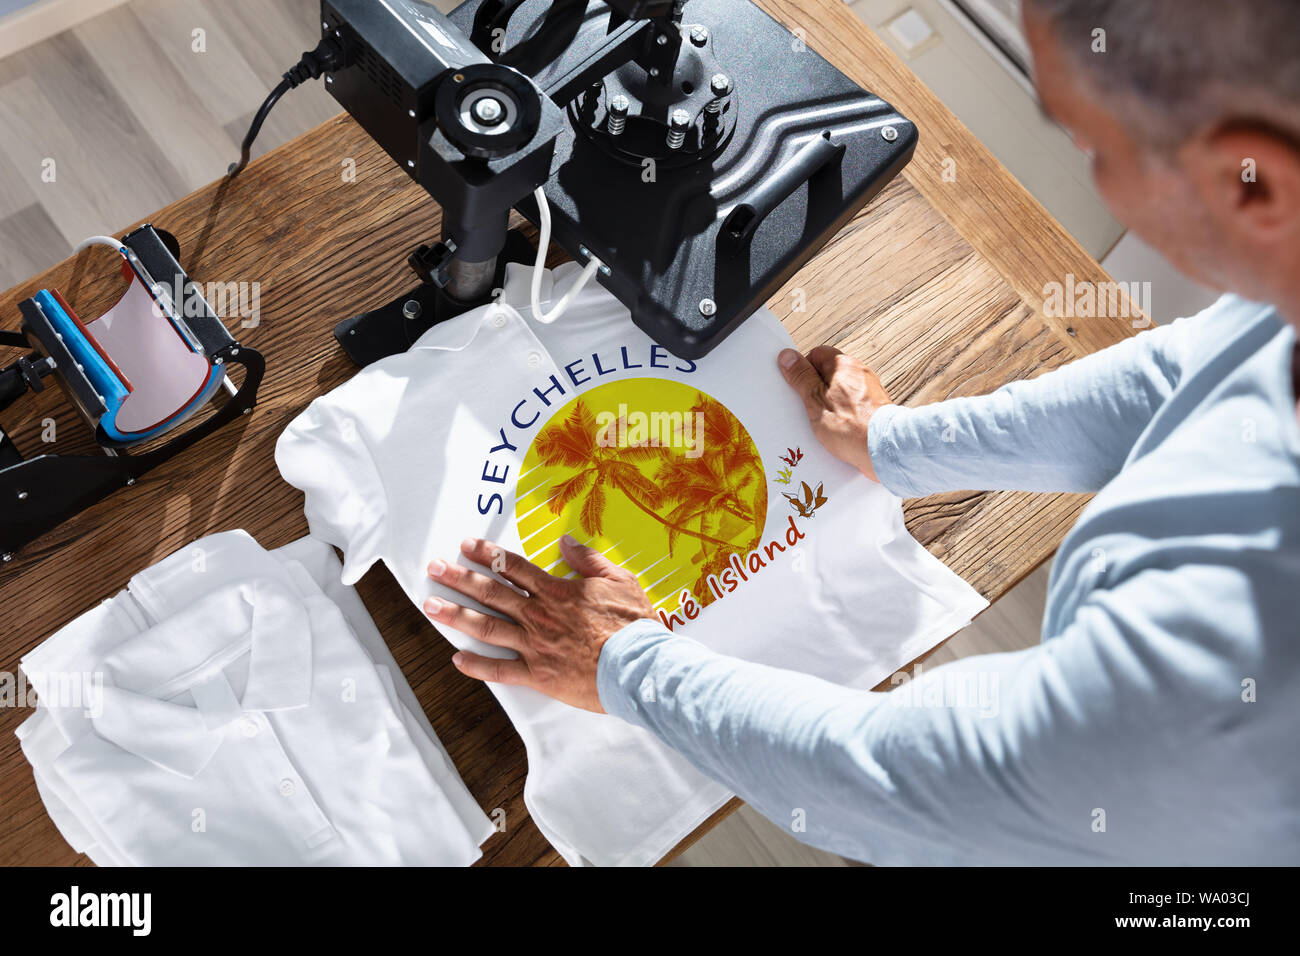 Man Printing Image On T-Shirt In Workshop Stock Photo